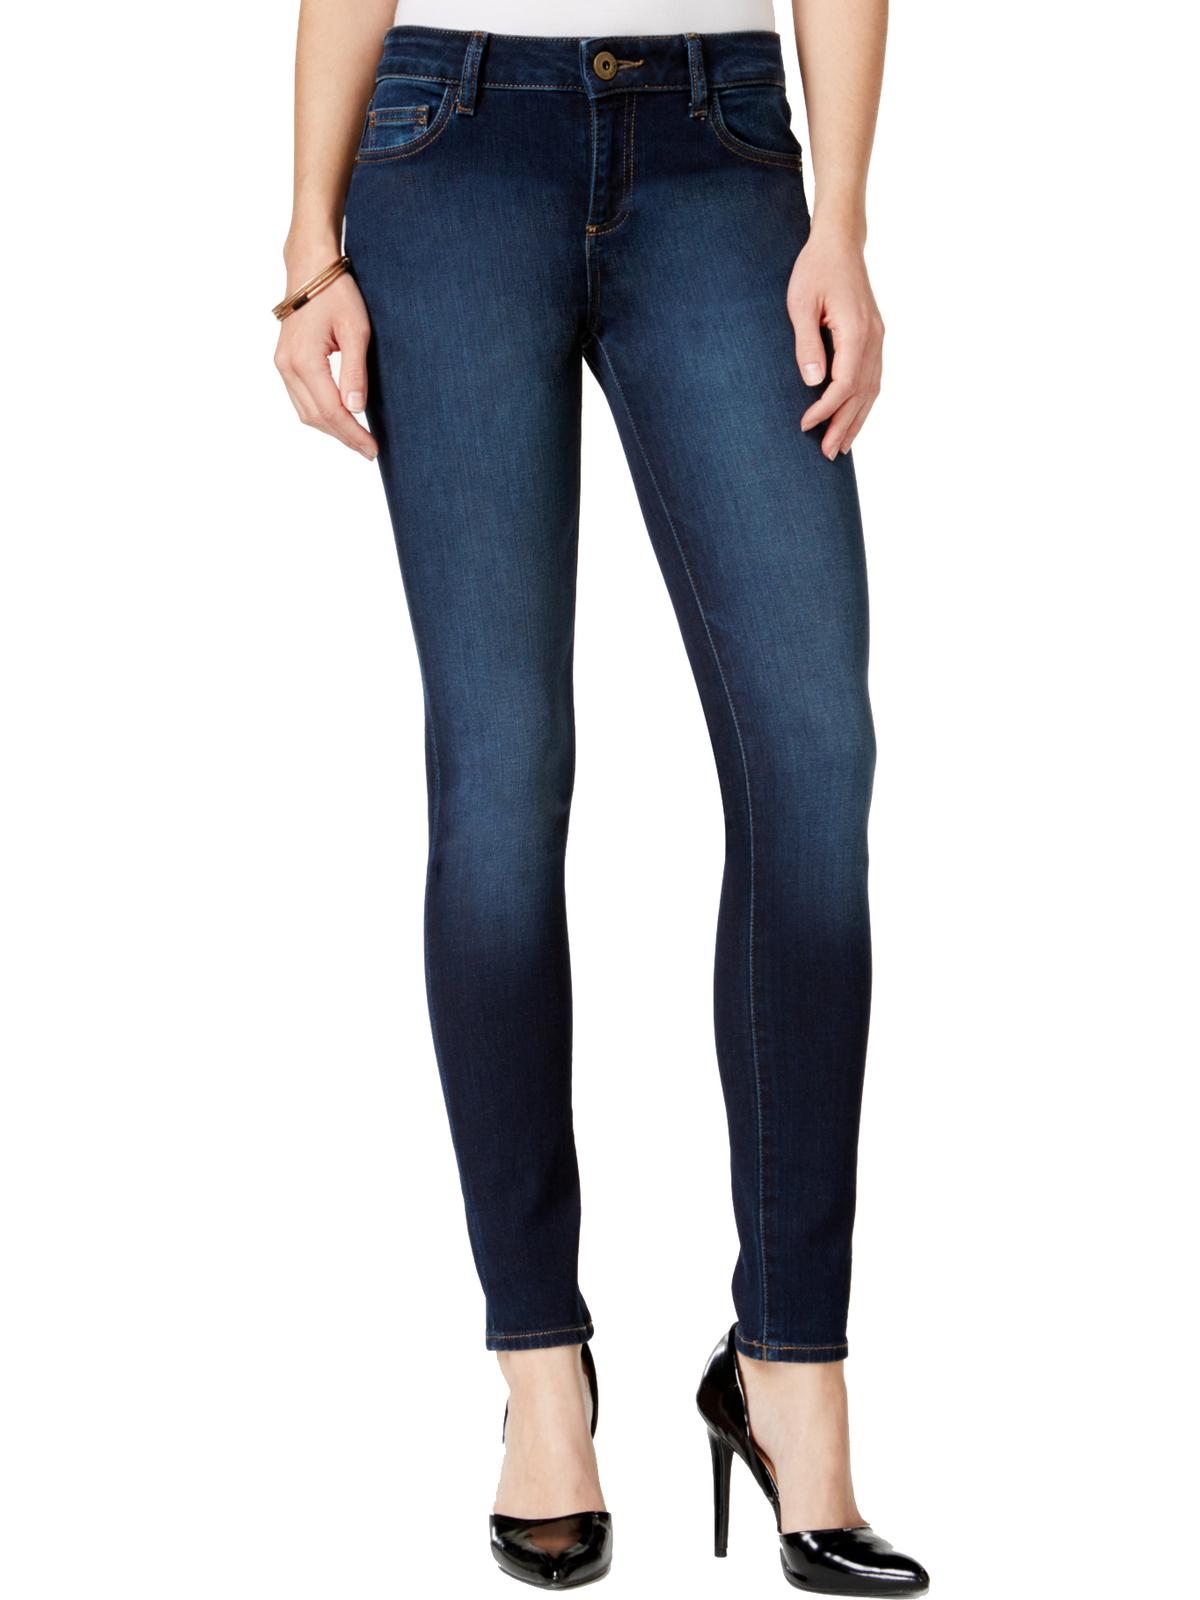 DL1961 Florence Womens Denim Mid-Rise Skinny Jeans